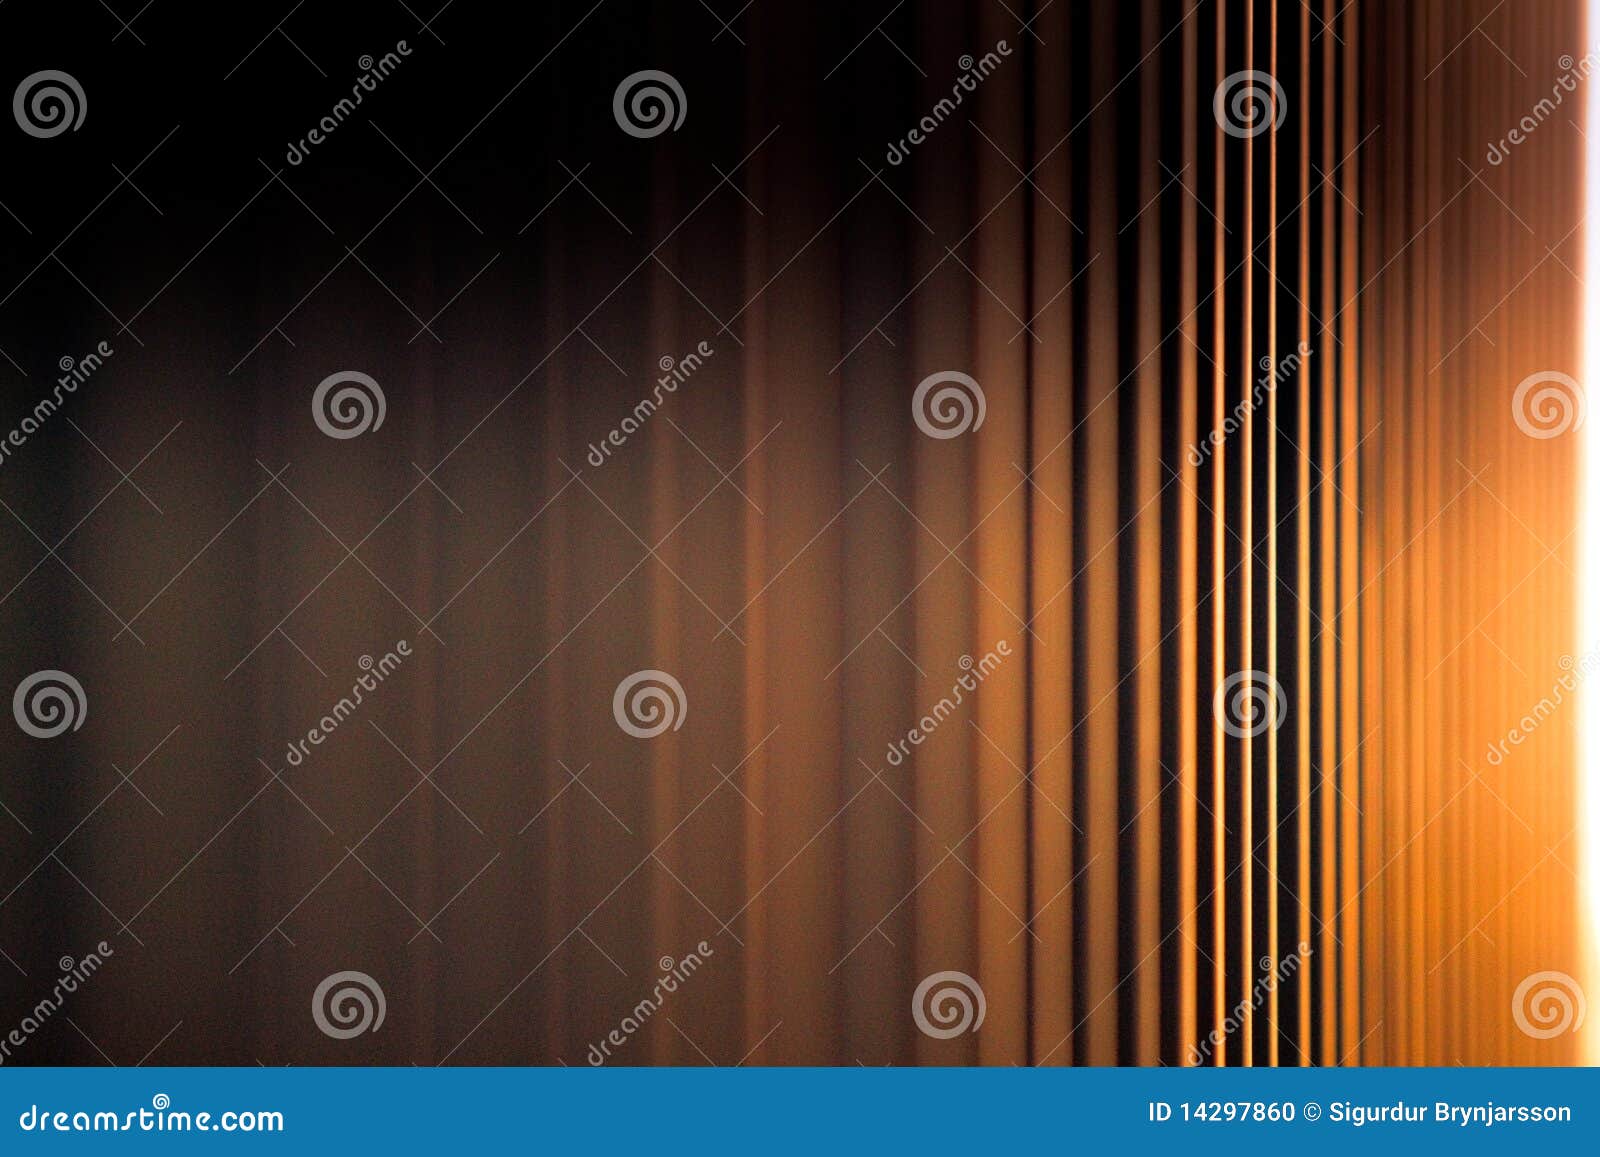 lines background pattern